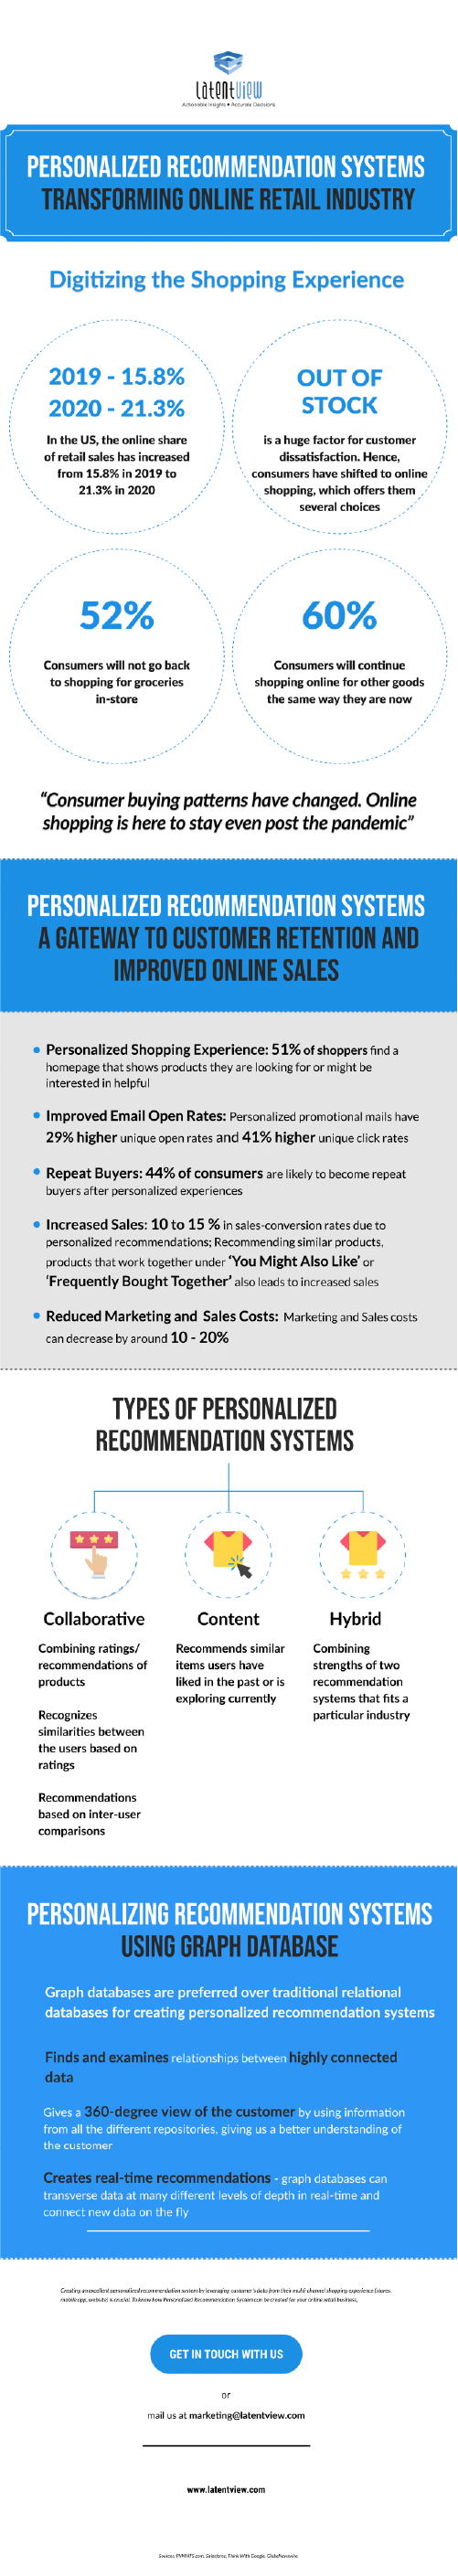 Personalized Recommendation Systems Transforming the Online Retail Industry pre